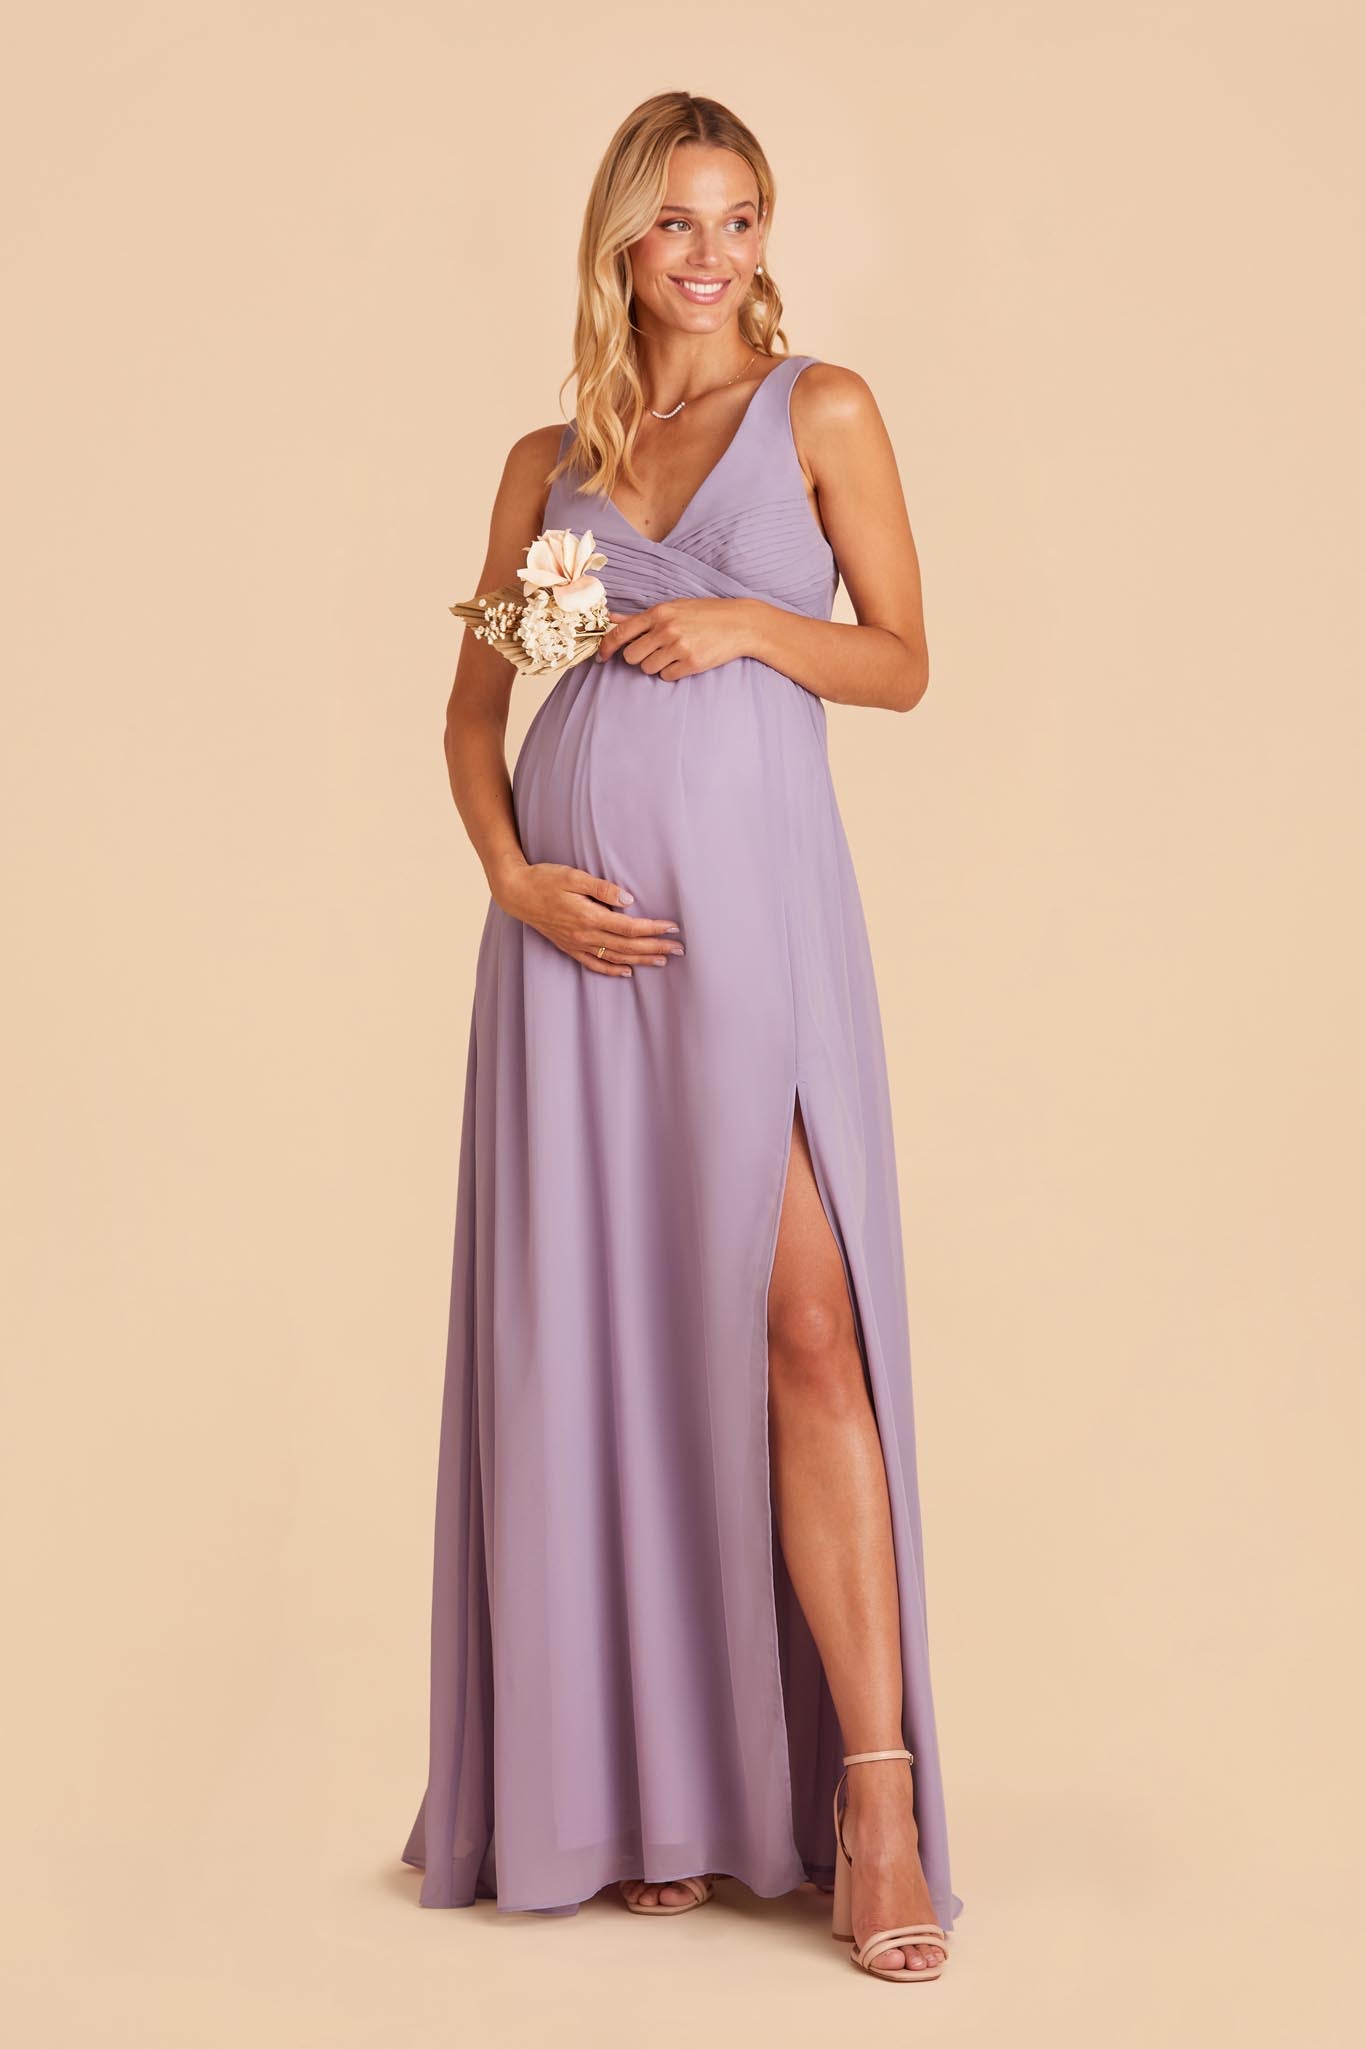 Lavender Laurie Empire Dress by Birdy Grey